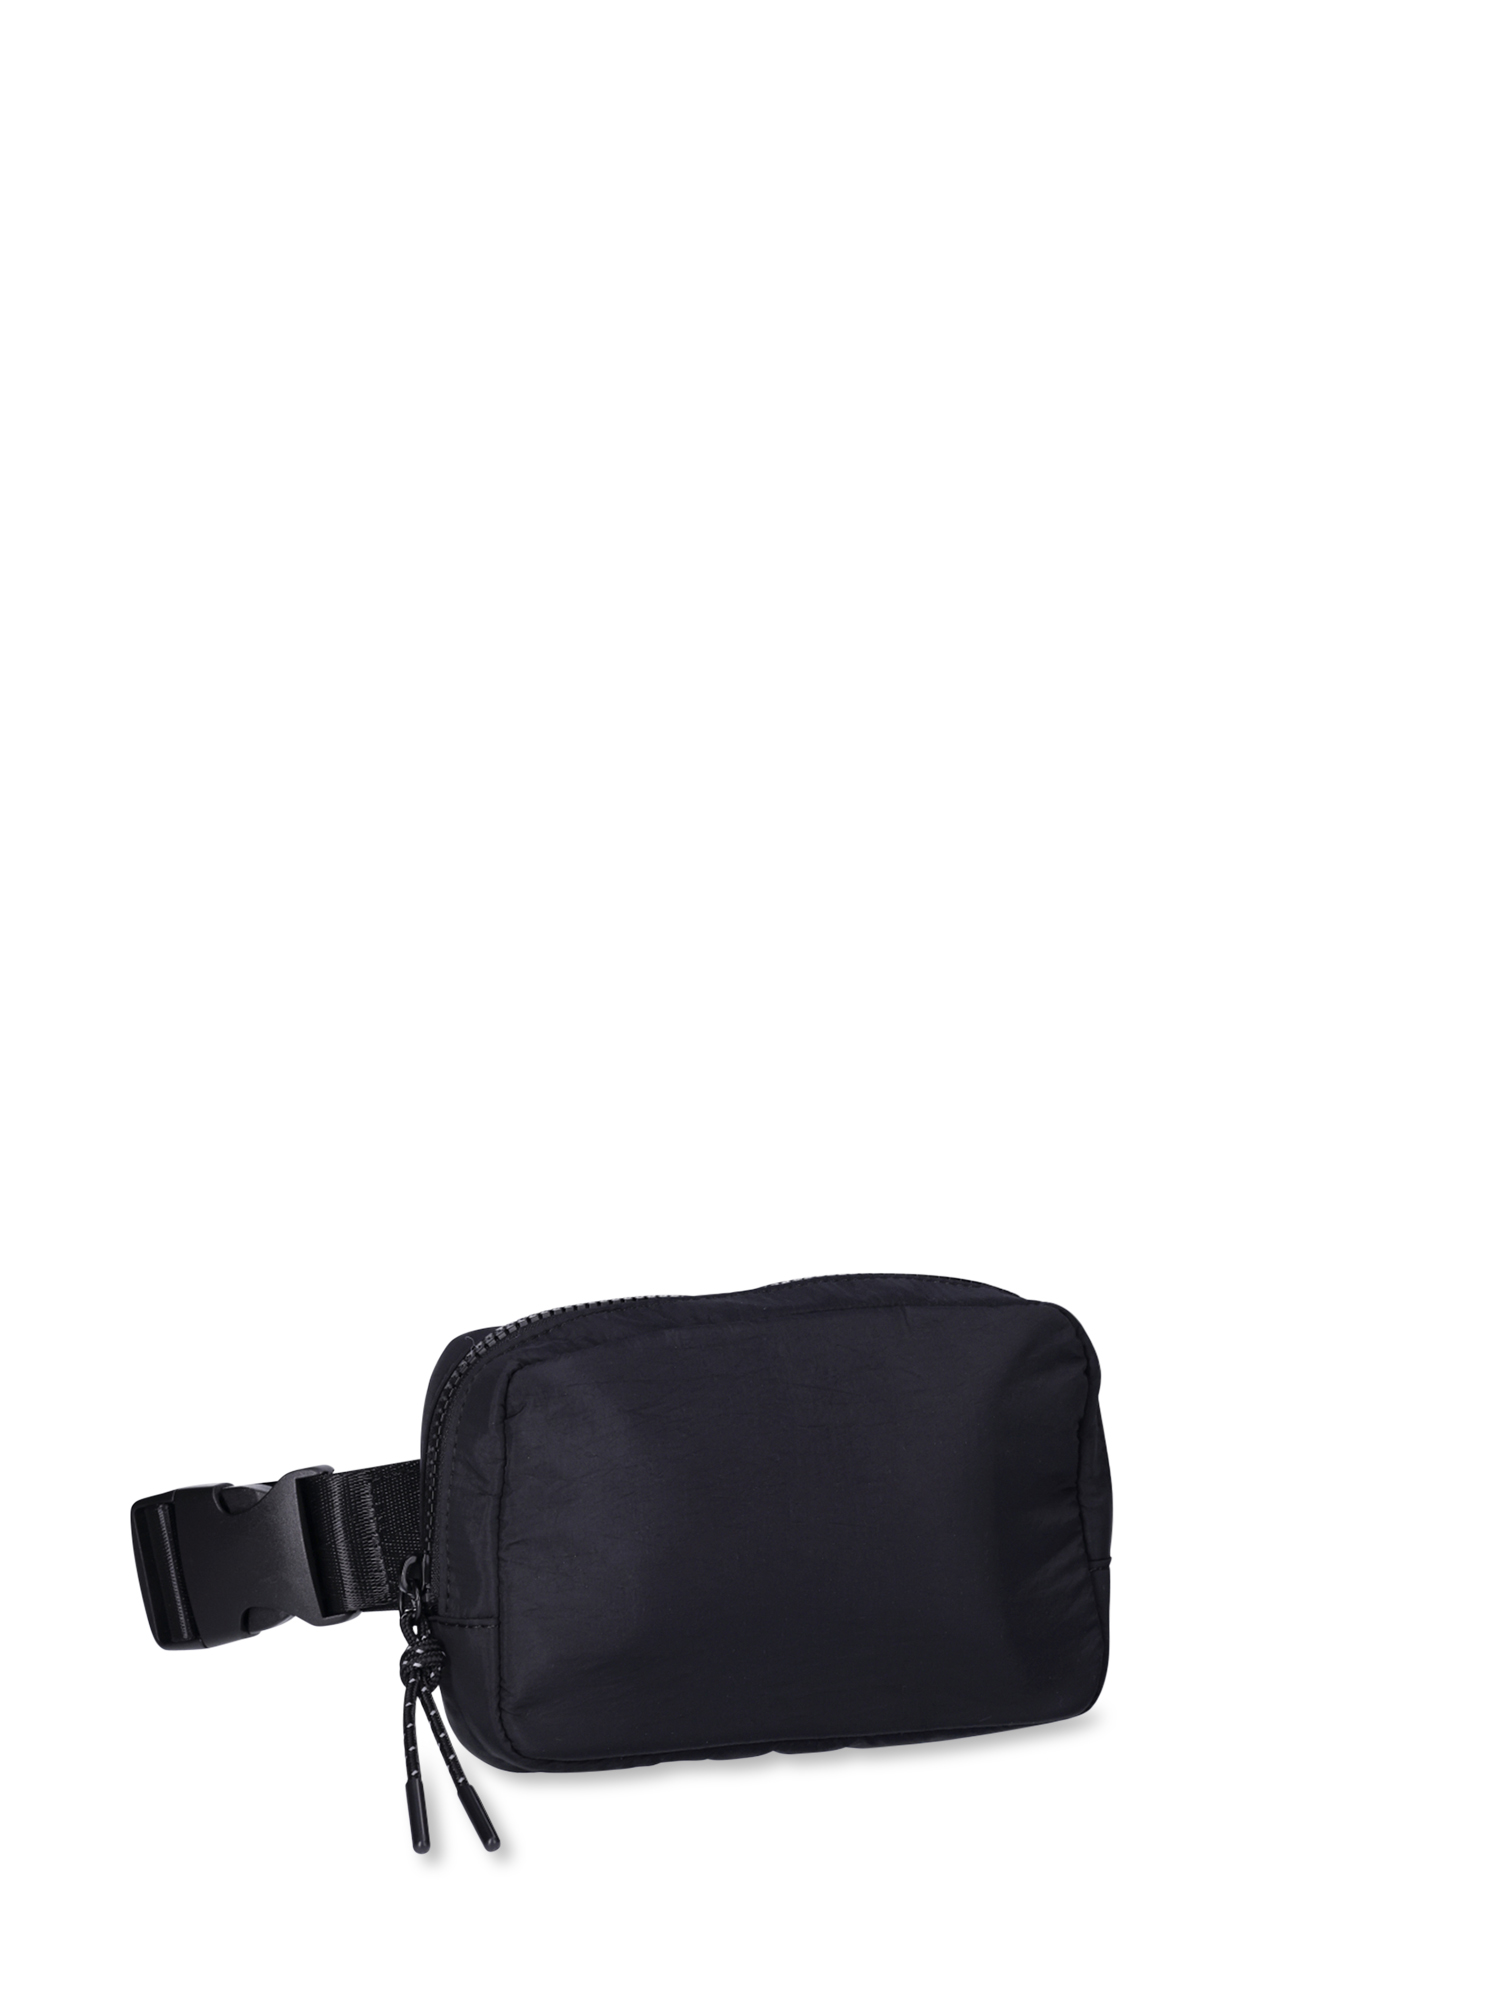 Athletic Works Women's Fanny Pack, Black